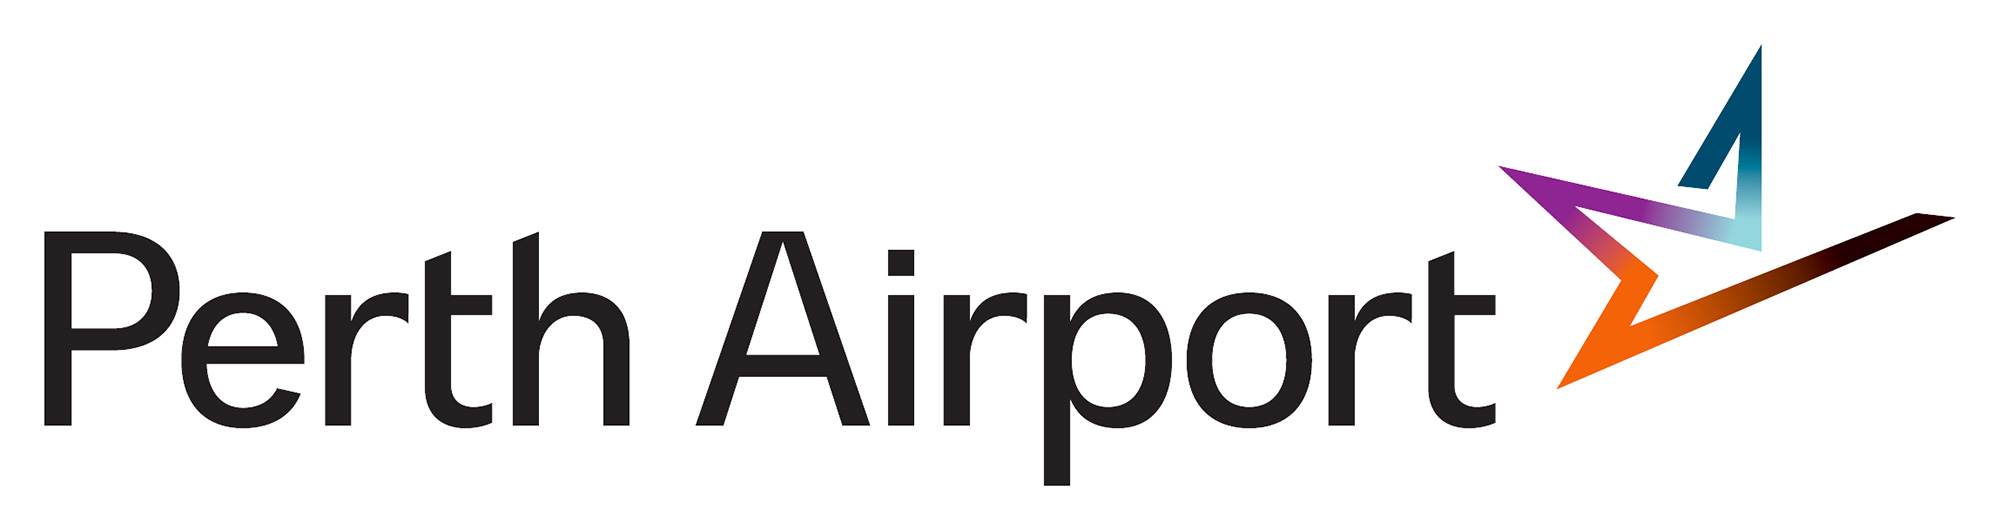 New Logo and Identity for Perth Airport by PUSH Collective